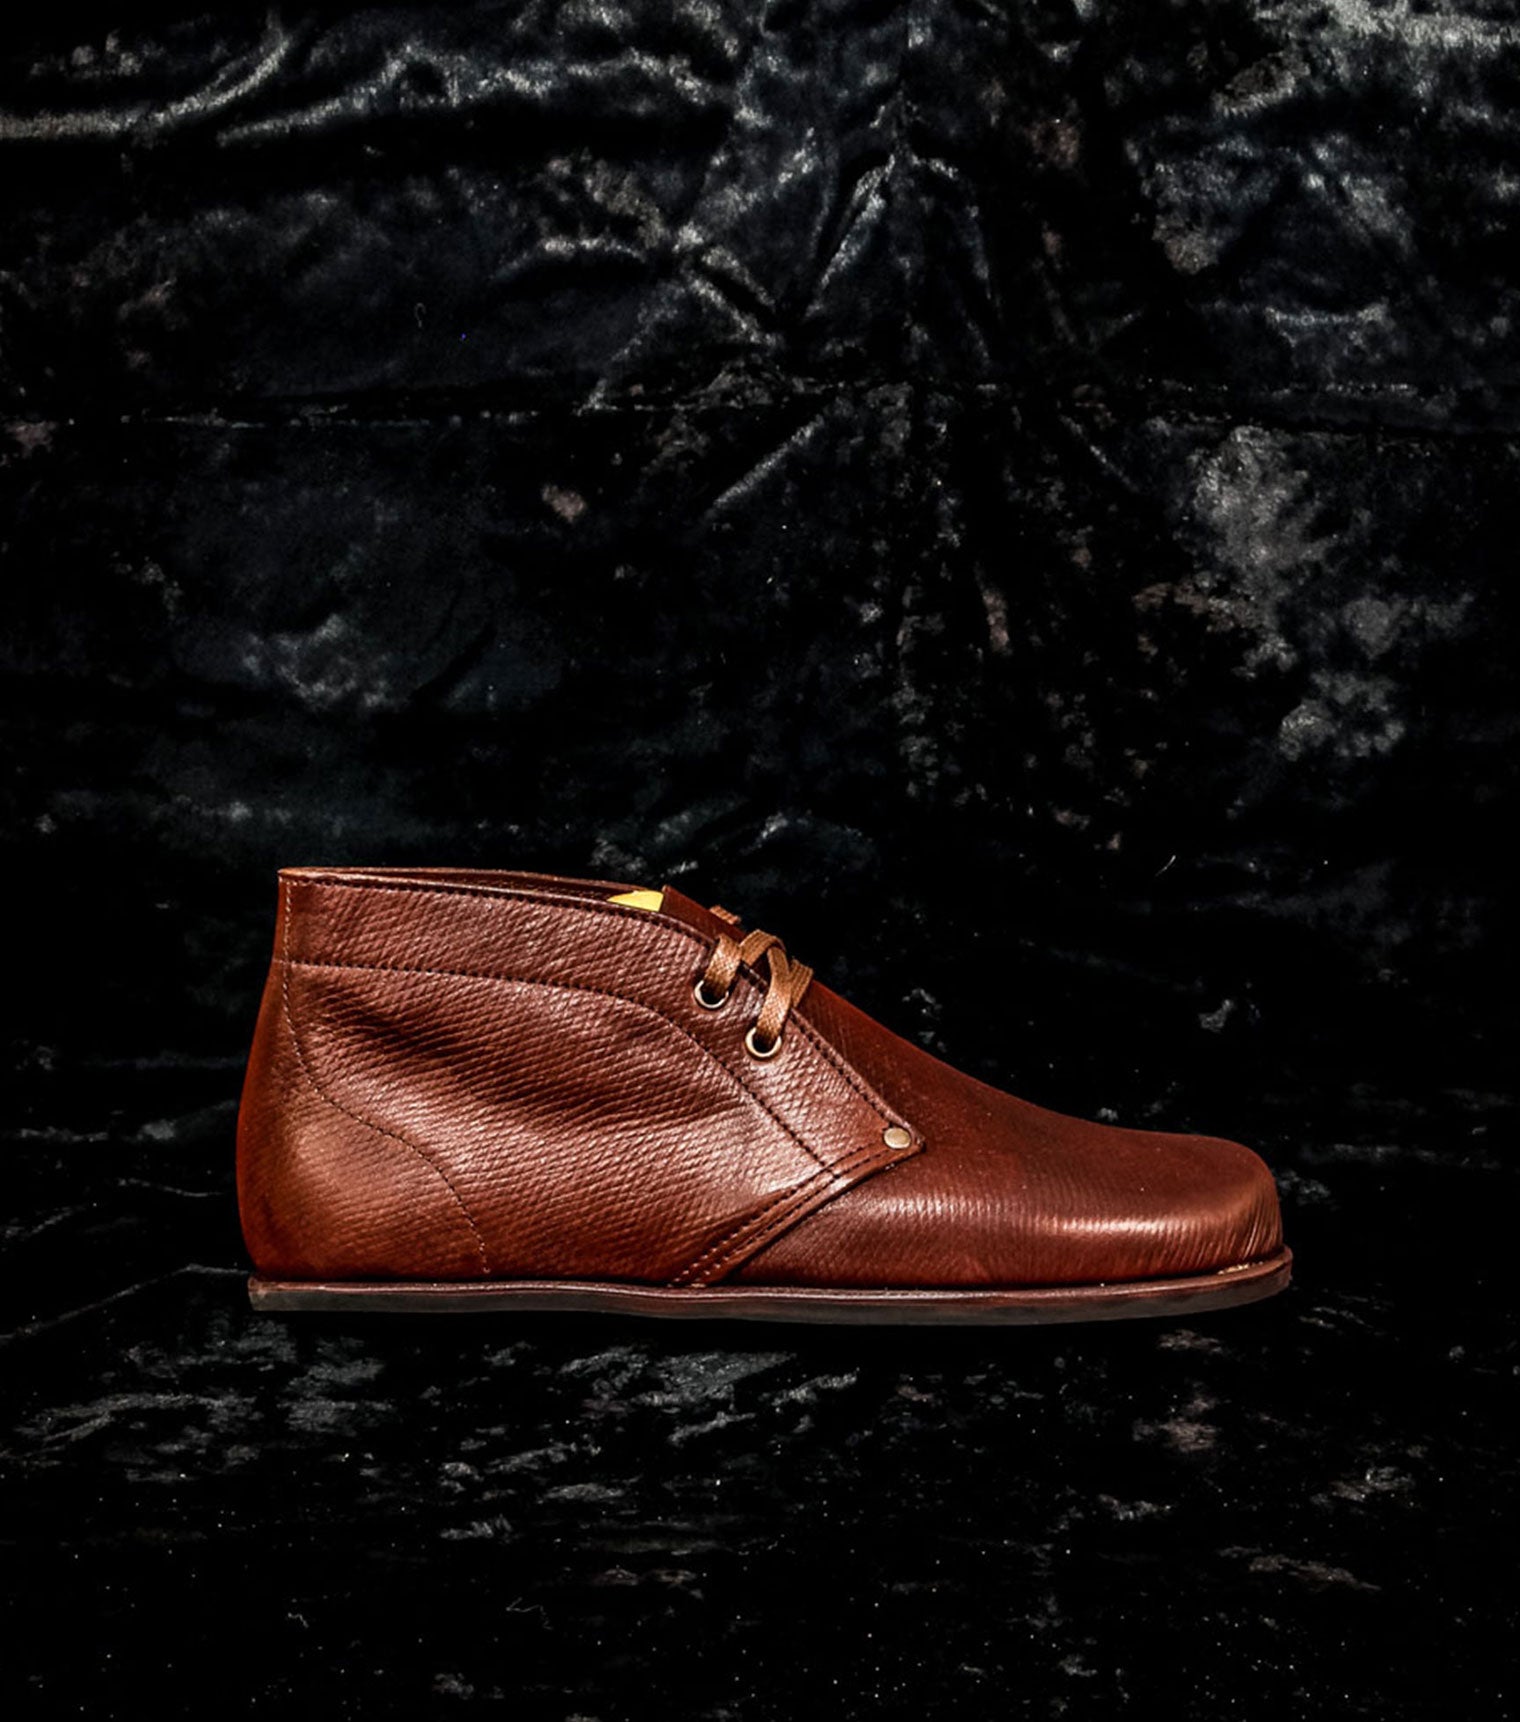 Brown Barefoot Desert Boots in British Baker's Russian Leather